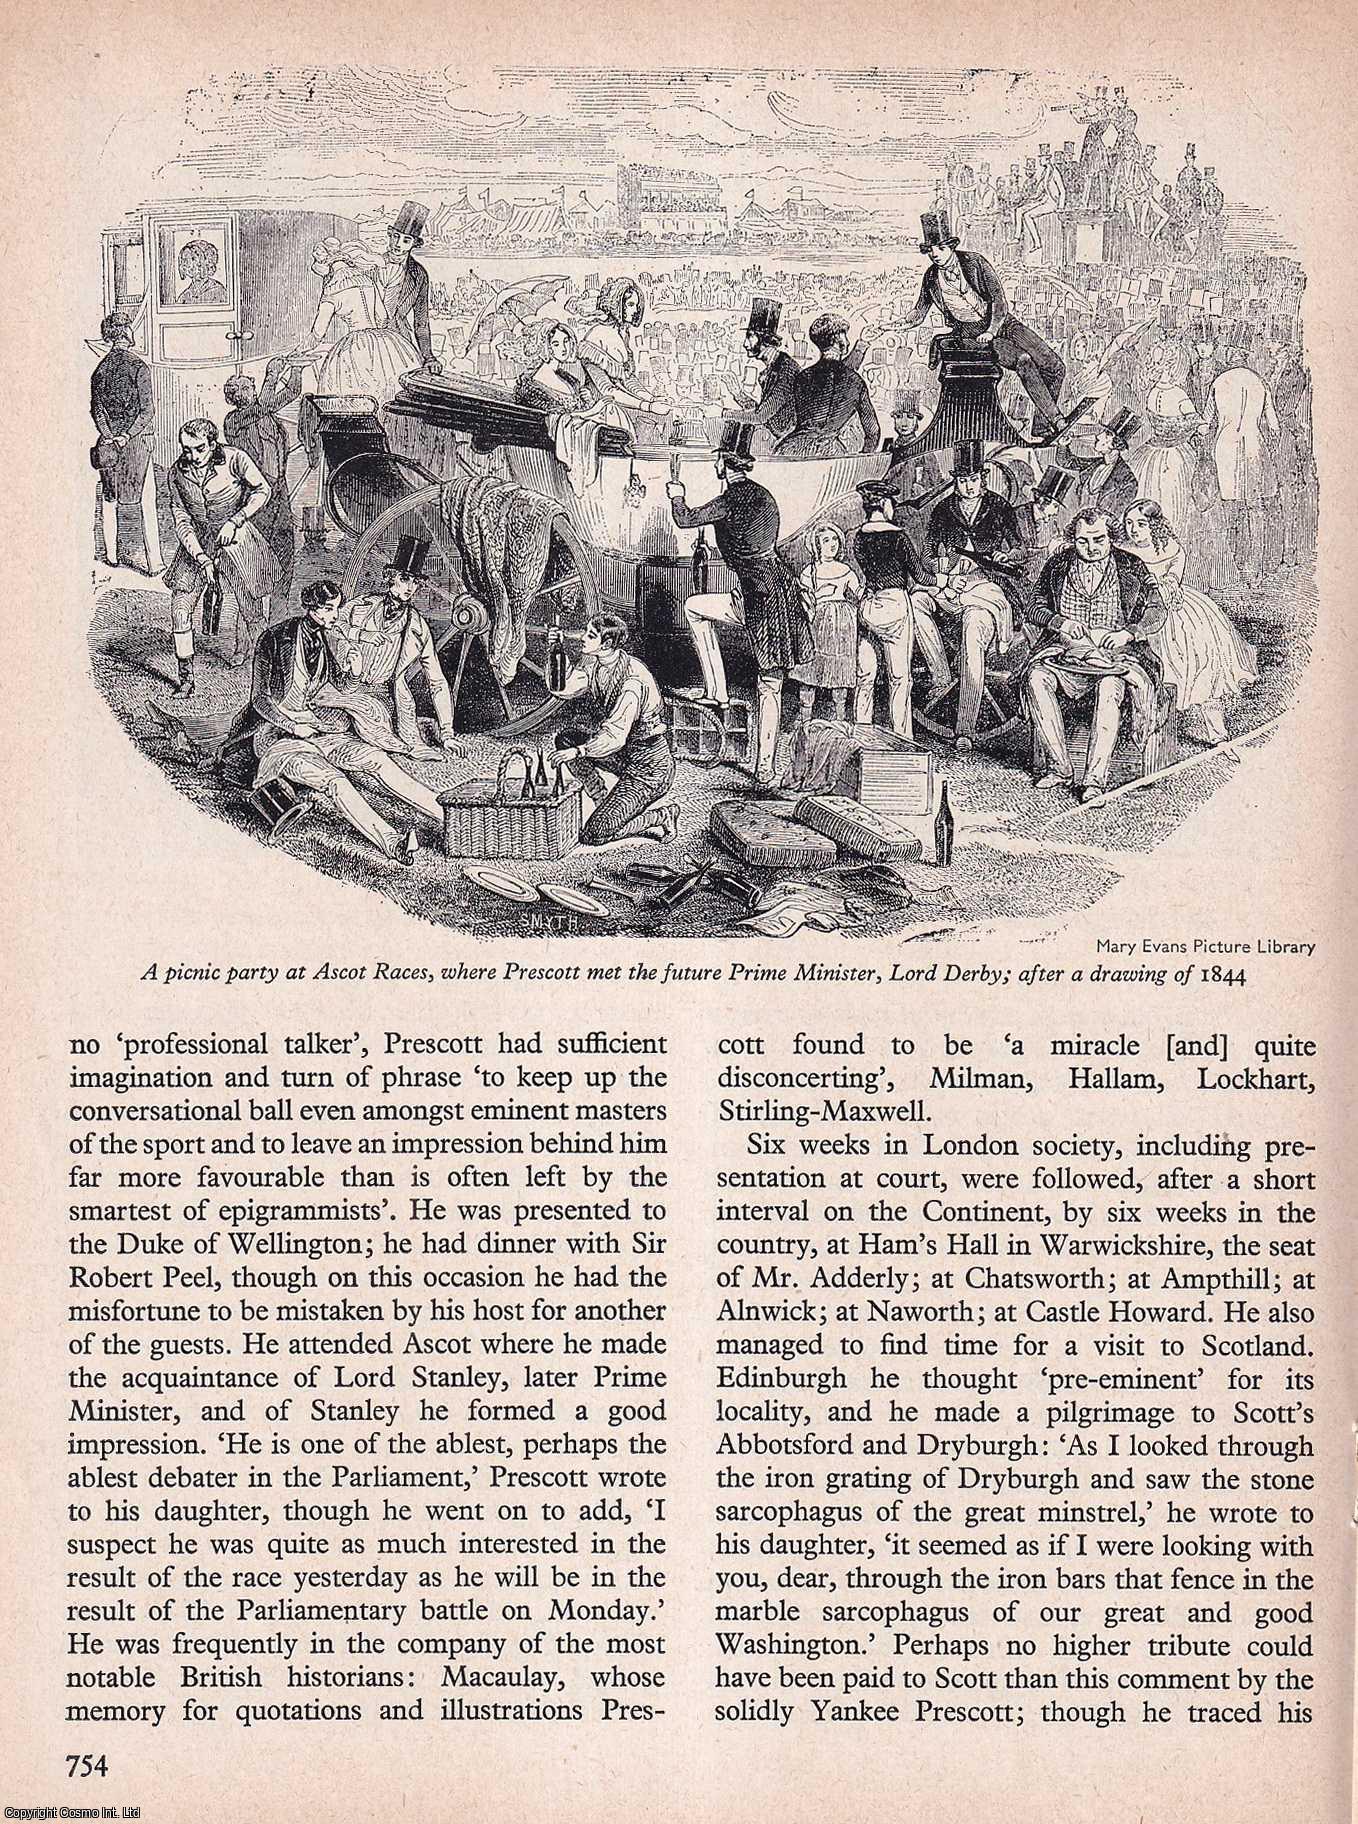 Roger Howell - Prescott's Visit to England, 1850. An original article from History Today magazine, 1967.